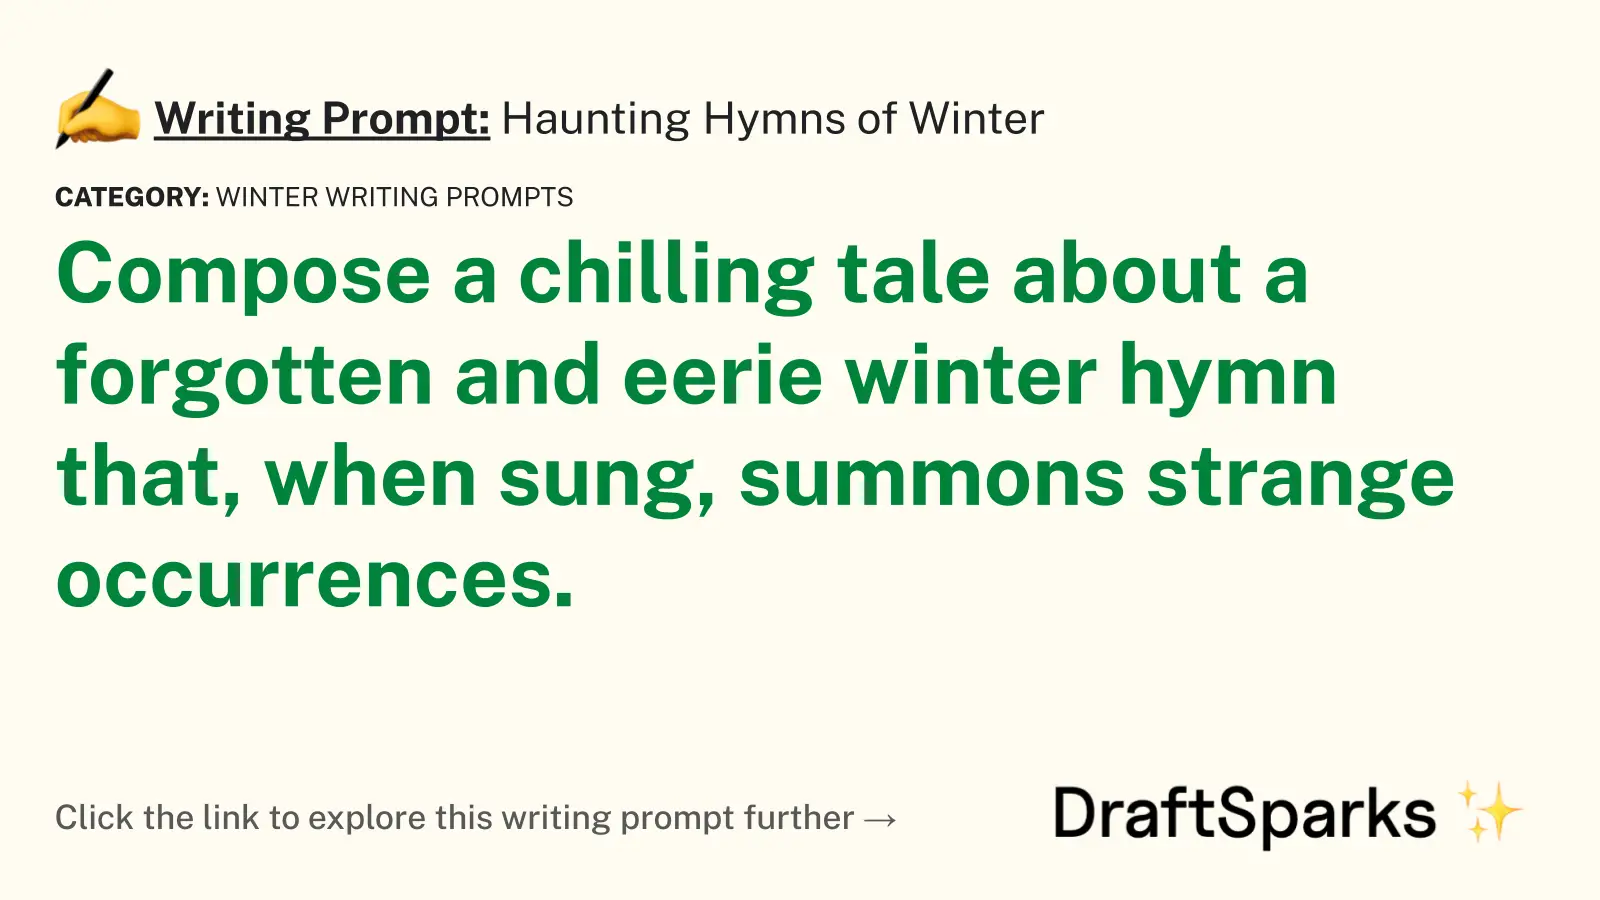 Haunting Hymns of Winter